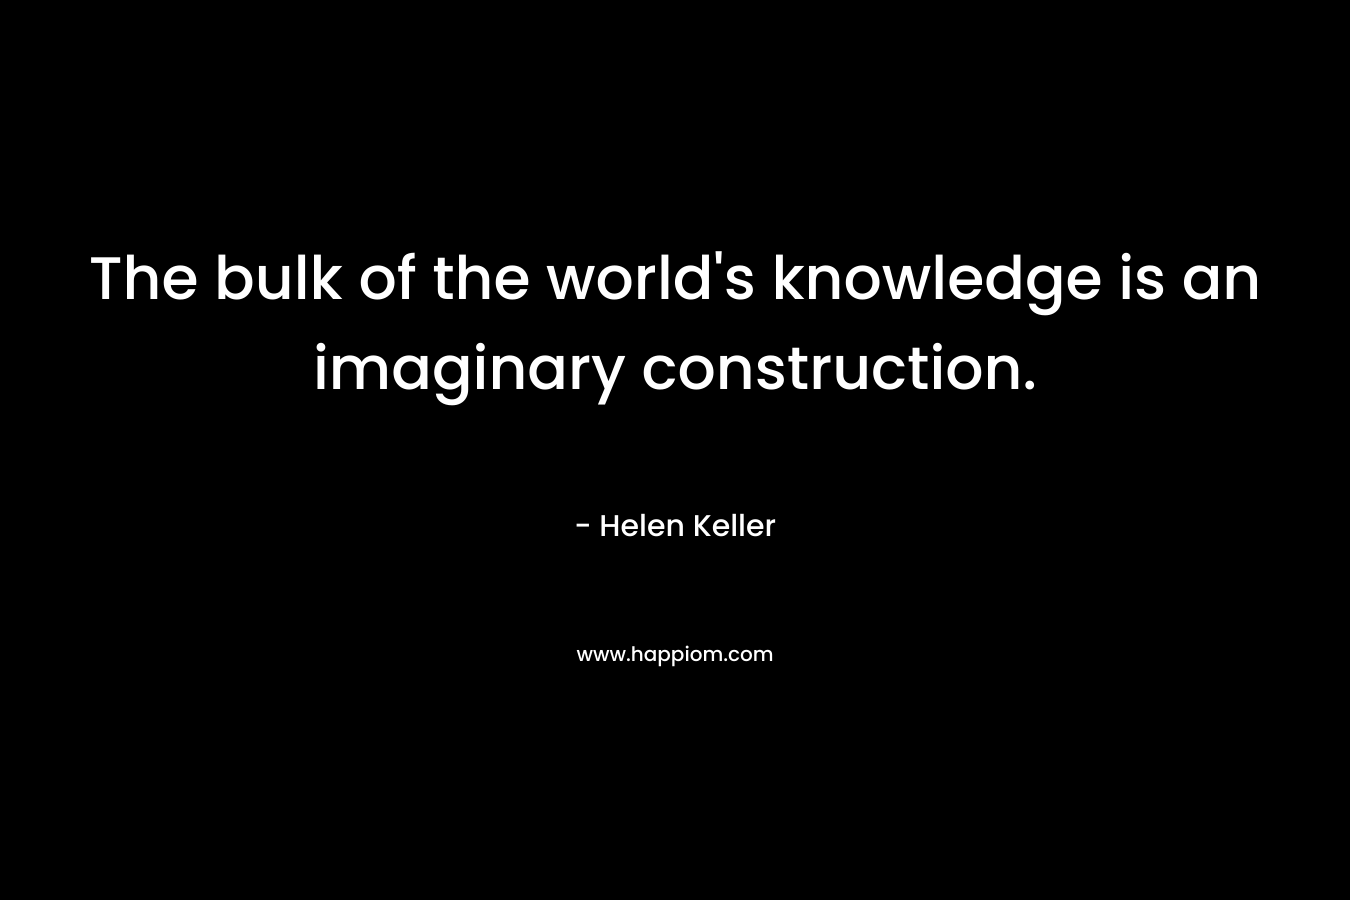 The bulk of the world's knowledge is an imaginary construction.